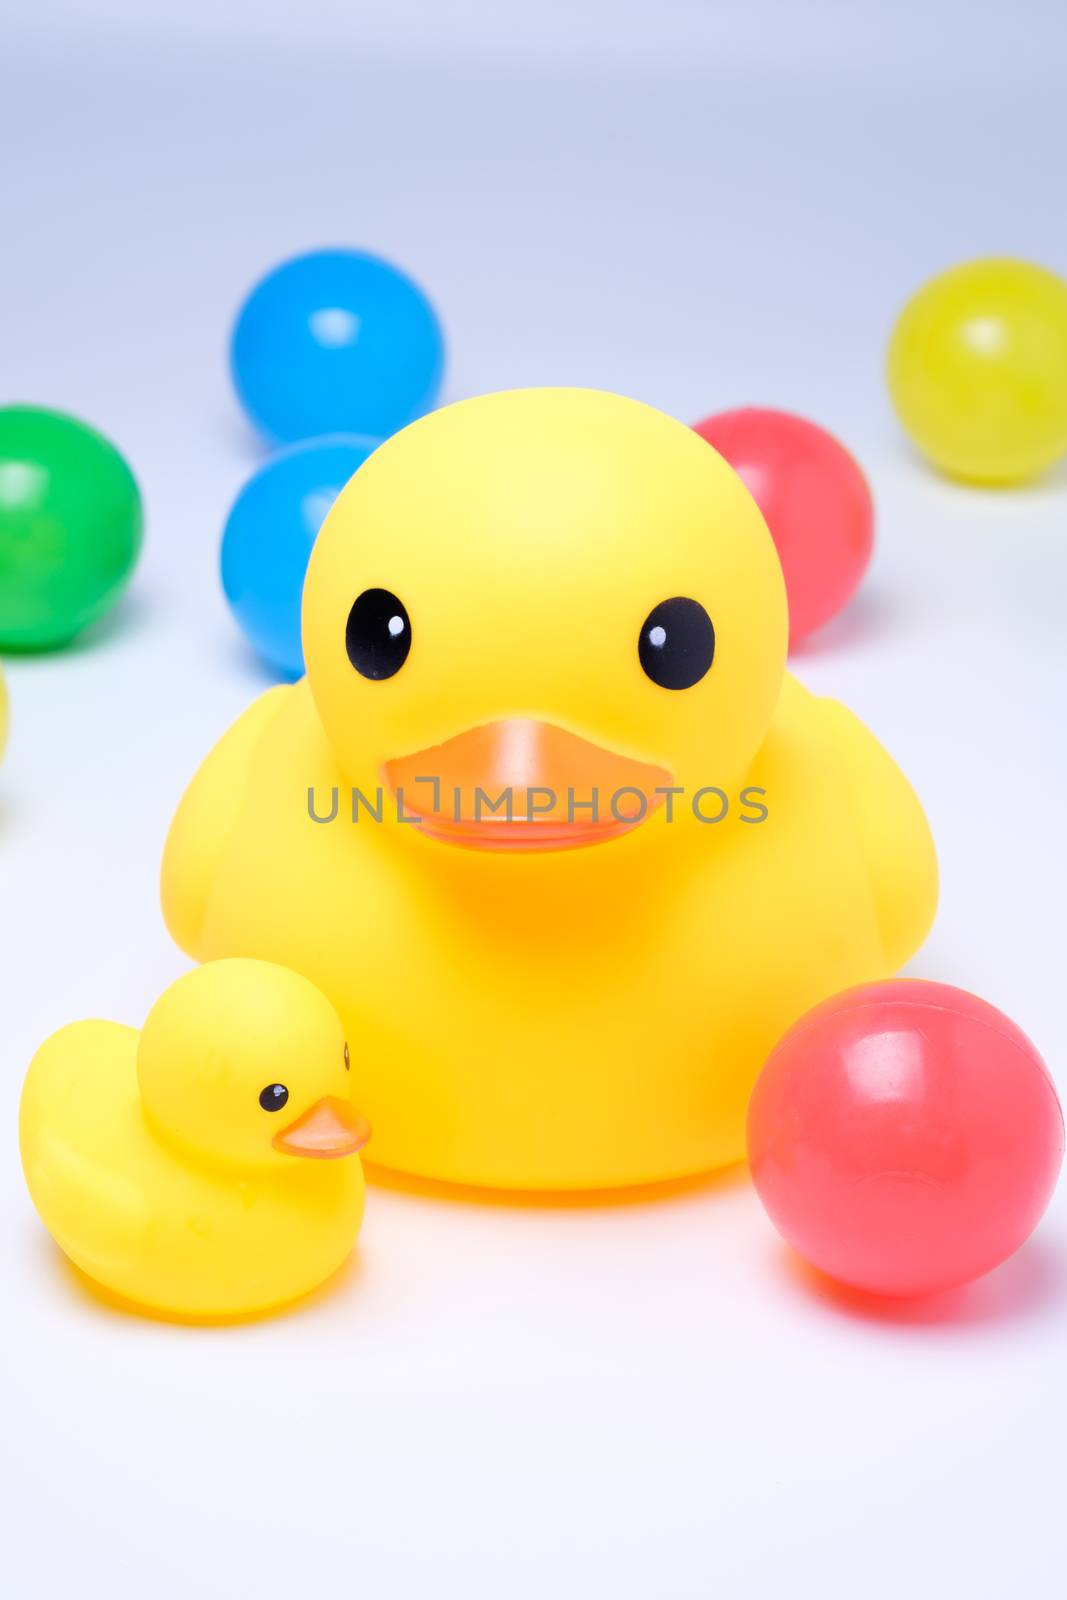 yellow rubber duck with colorful ball in white background